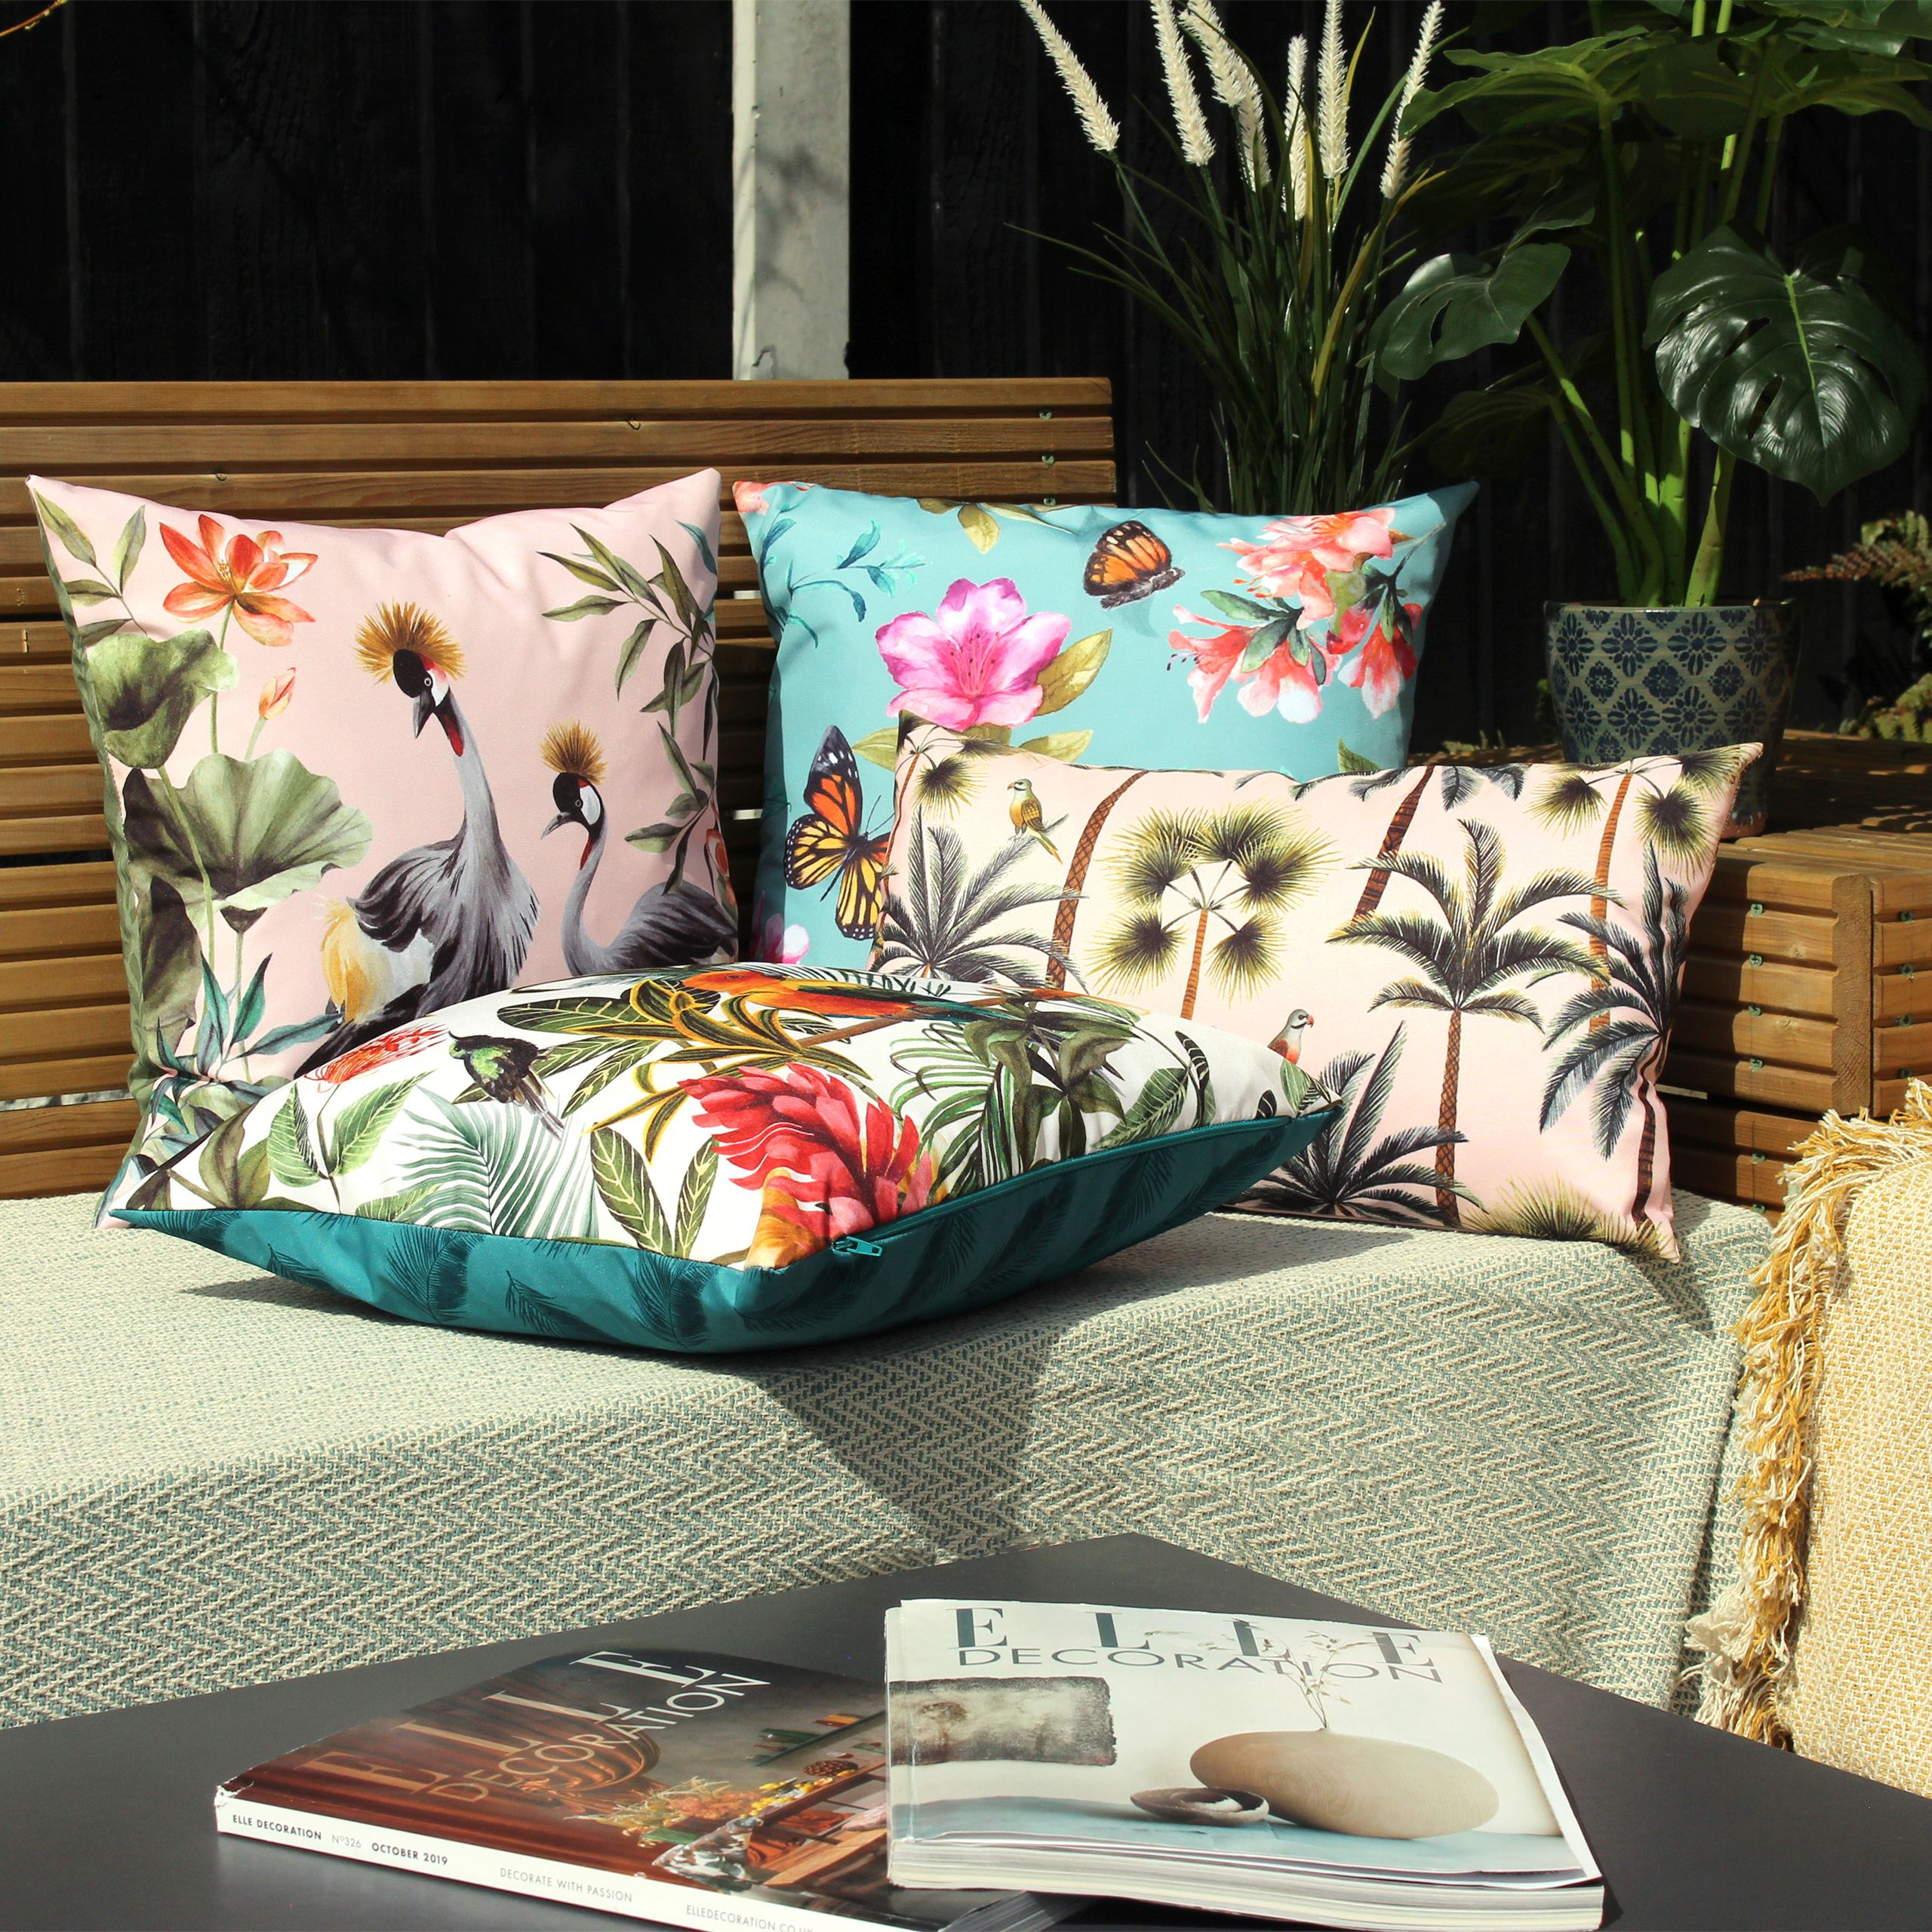 Add a pop of colour to your garden with this vibrant botanical cushion. Featuring a bold reversible design, this cushion will make a beautiful and durable addition to your outdoor space.